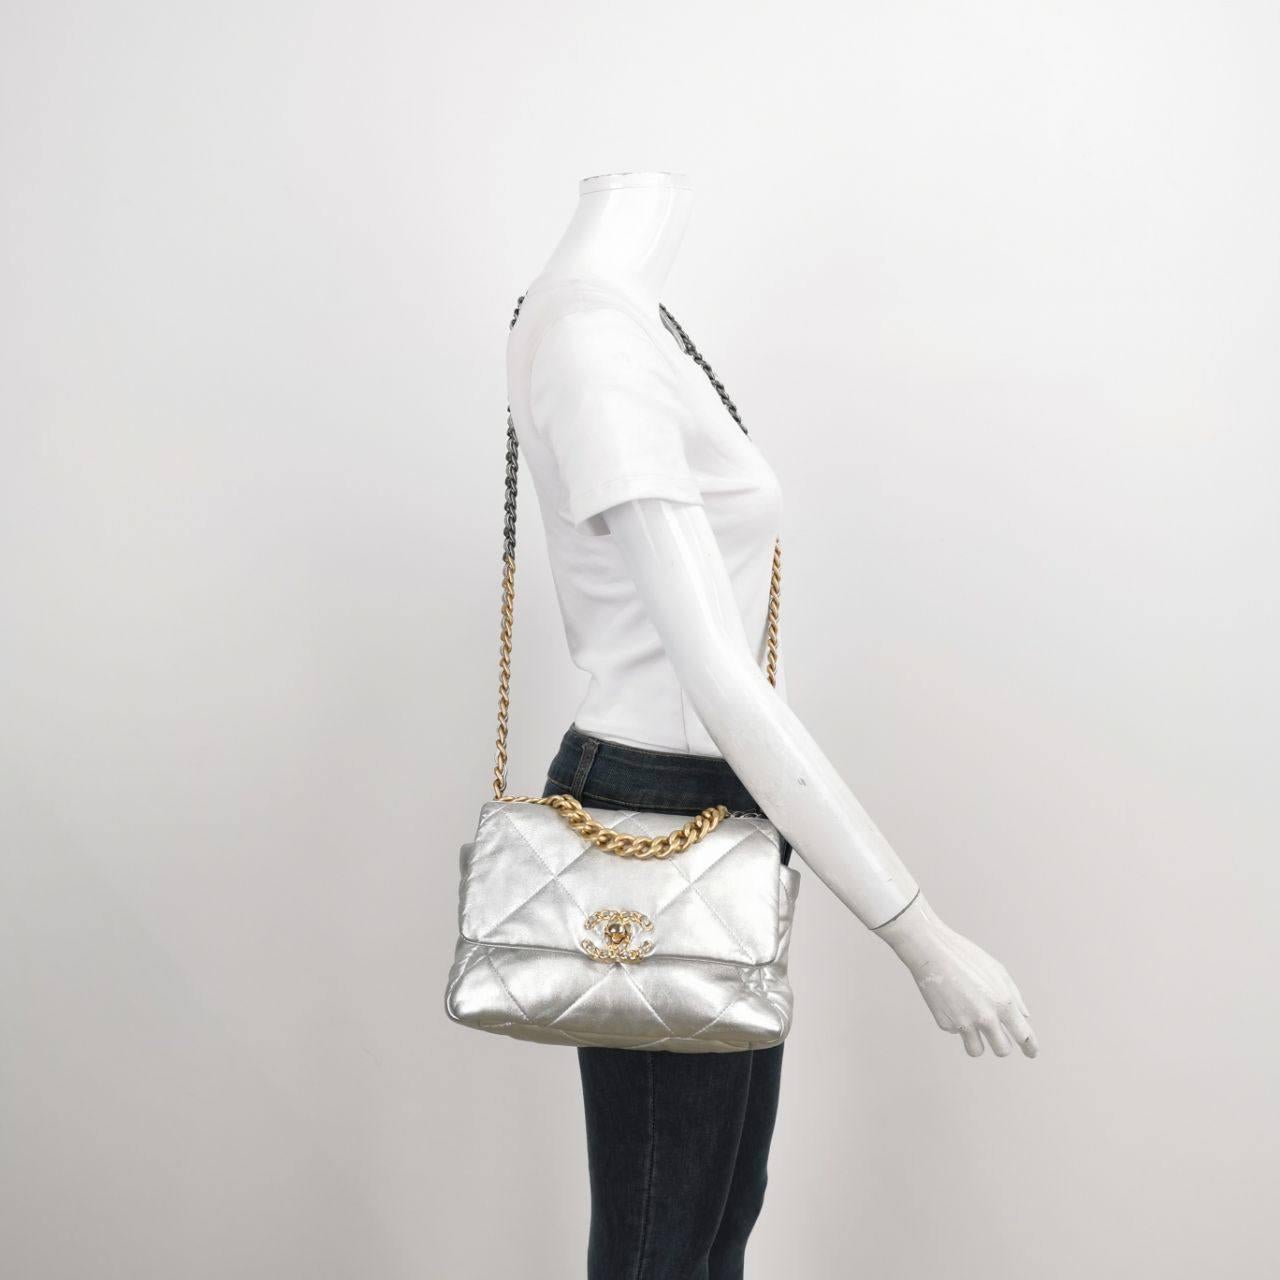 The Chanel 19 bag was the last bag to be designed by Karl Lagerfeld. Own a piece of history through this bag. Its relaxed leather and shape exudes a nonchalant effortless chic. The antiqued gold and silver hardware gives it a funky taste. It is the